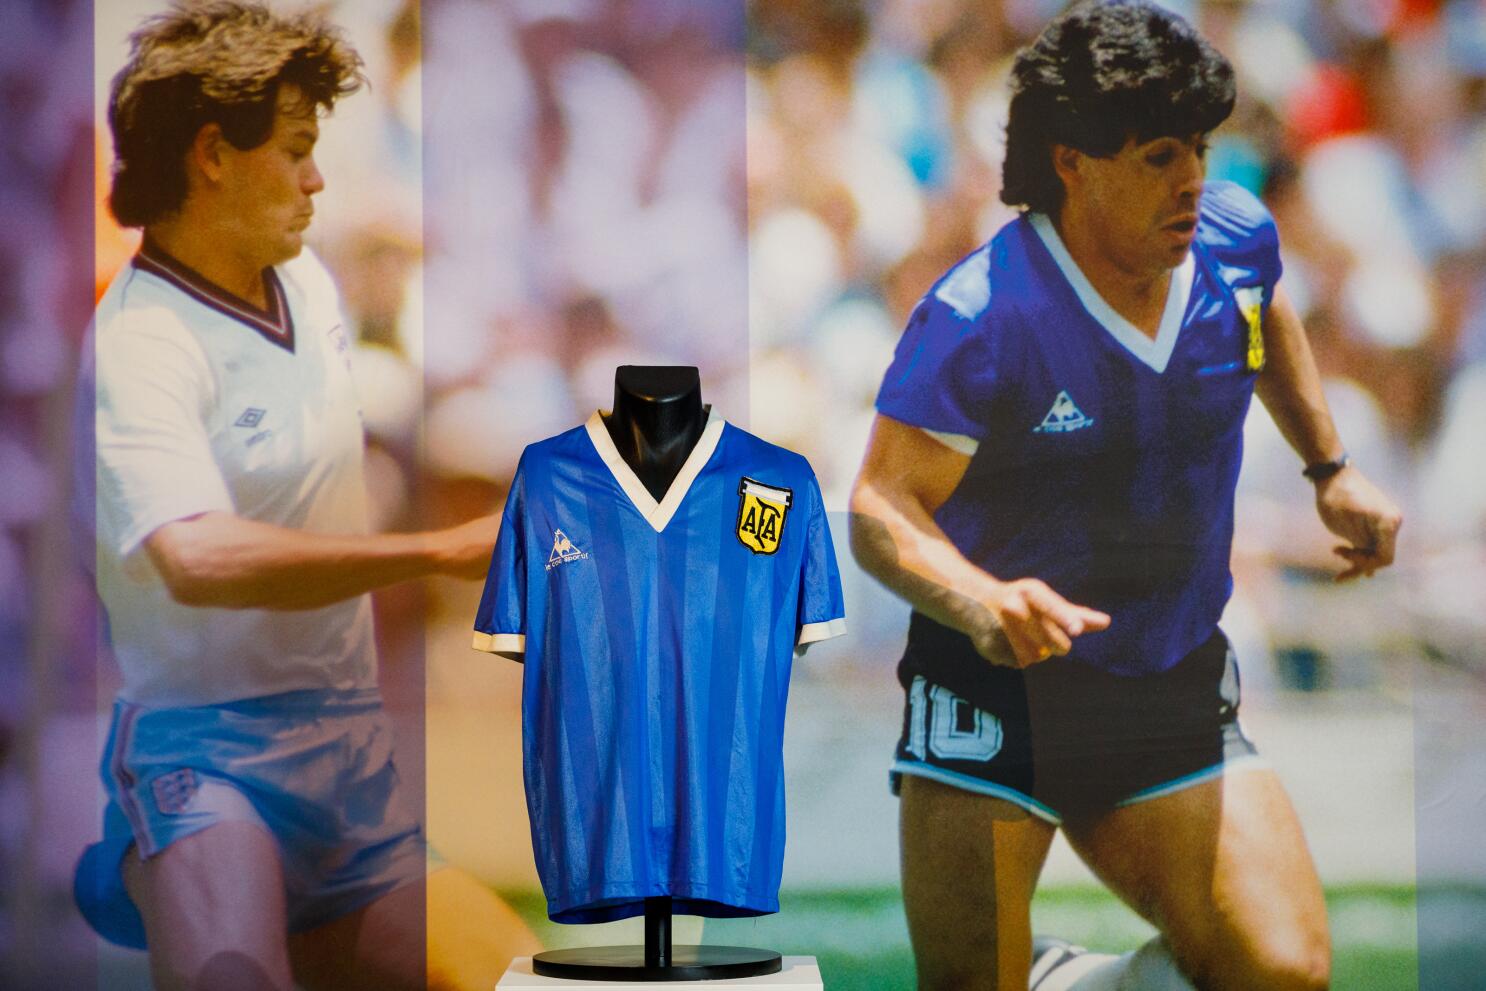 Hand of God' Shirt Could Fetch £4 Million at Auction, Become Most Expensive  Jersey Ever – SportsLogos.Net News